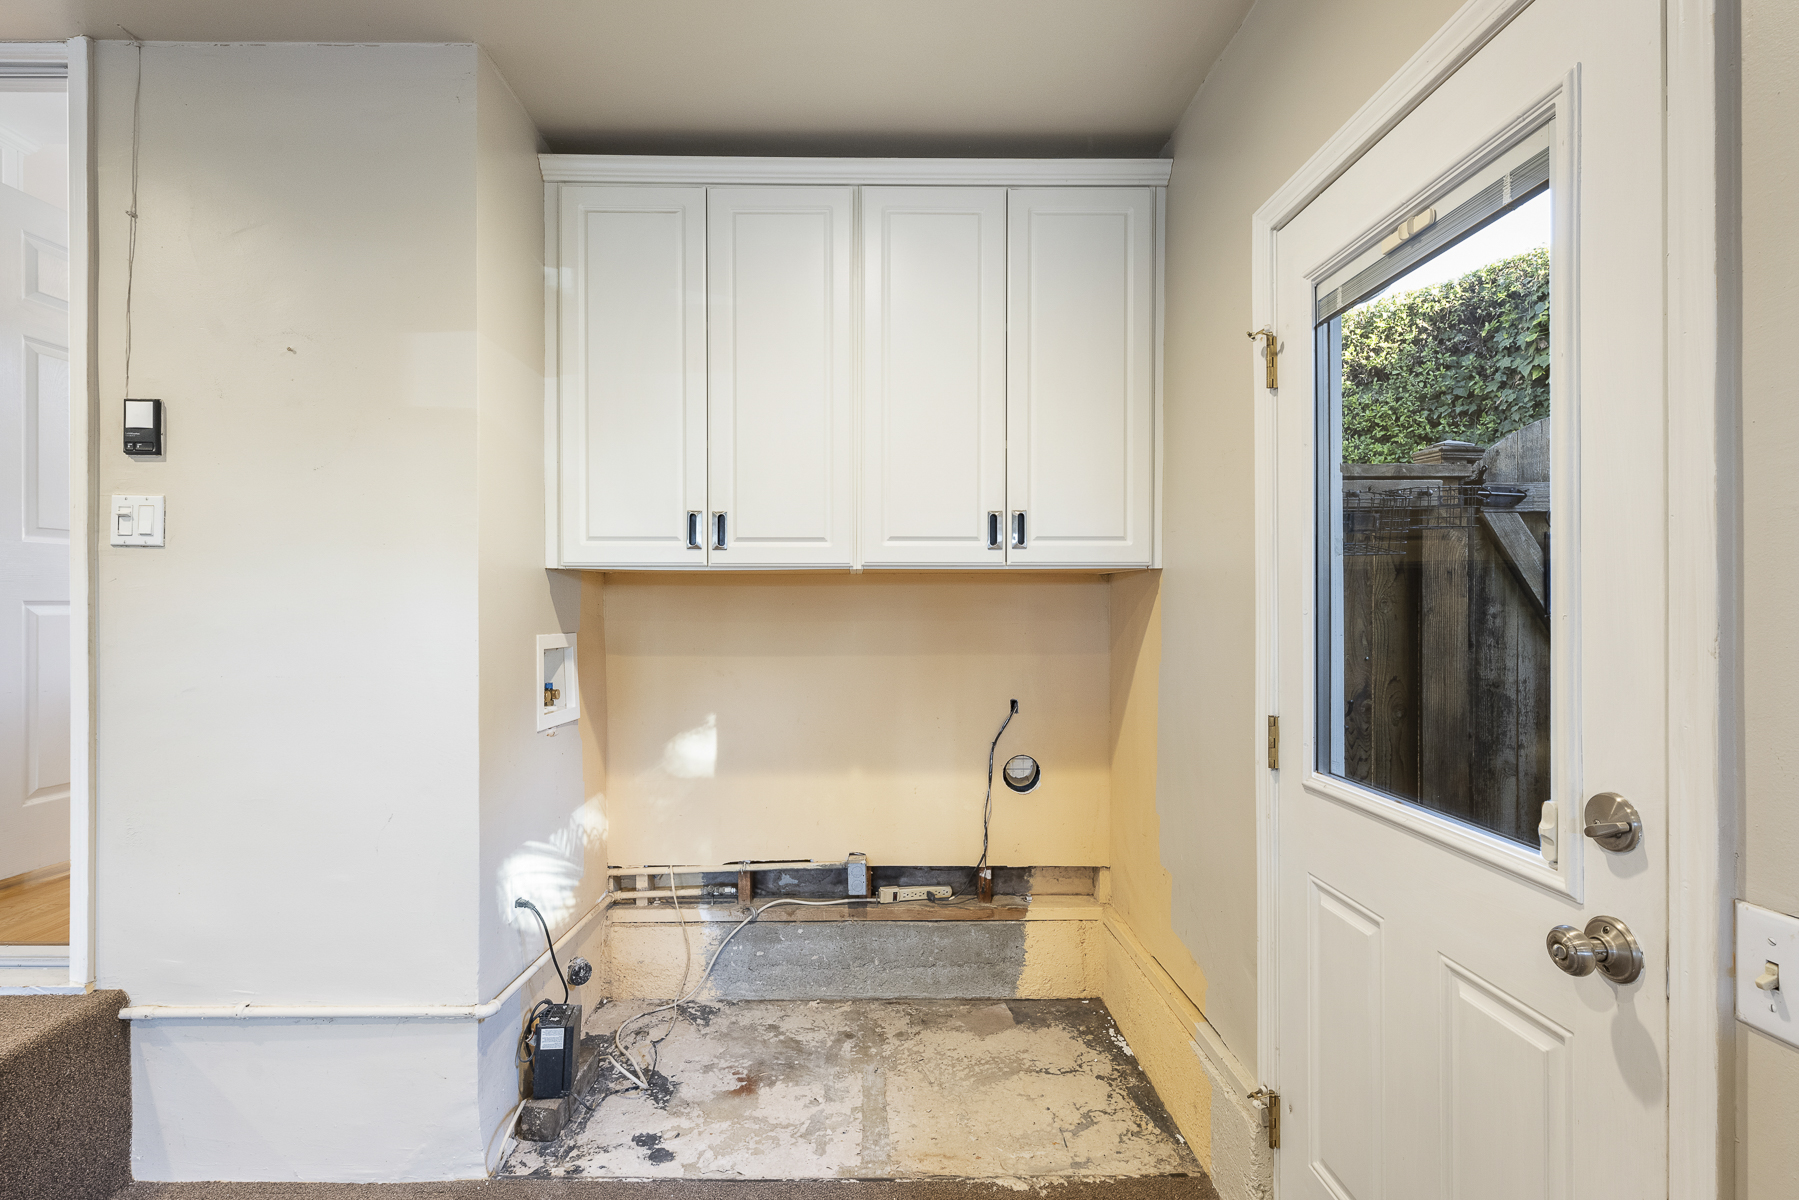 806 N. Adlena Drive, Fullerton, CA 92833: Interior shot of washer and drier space.